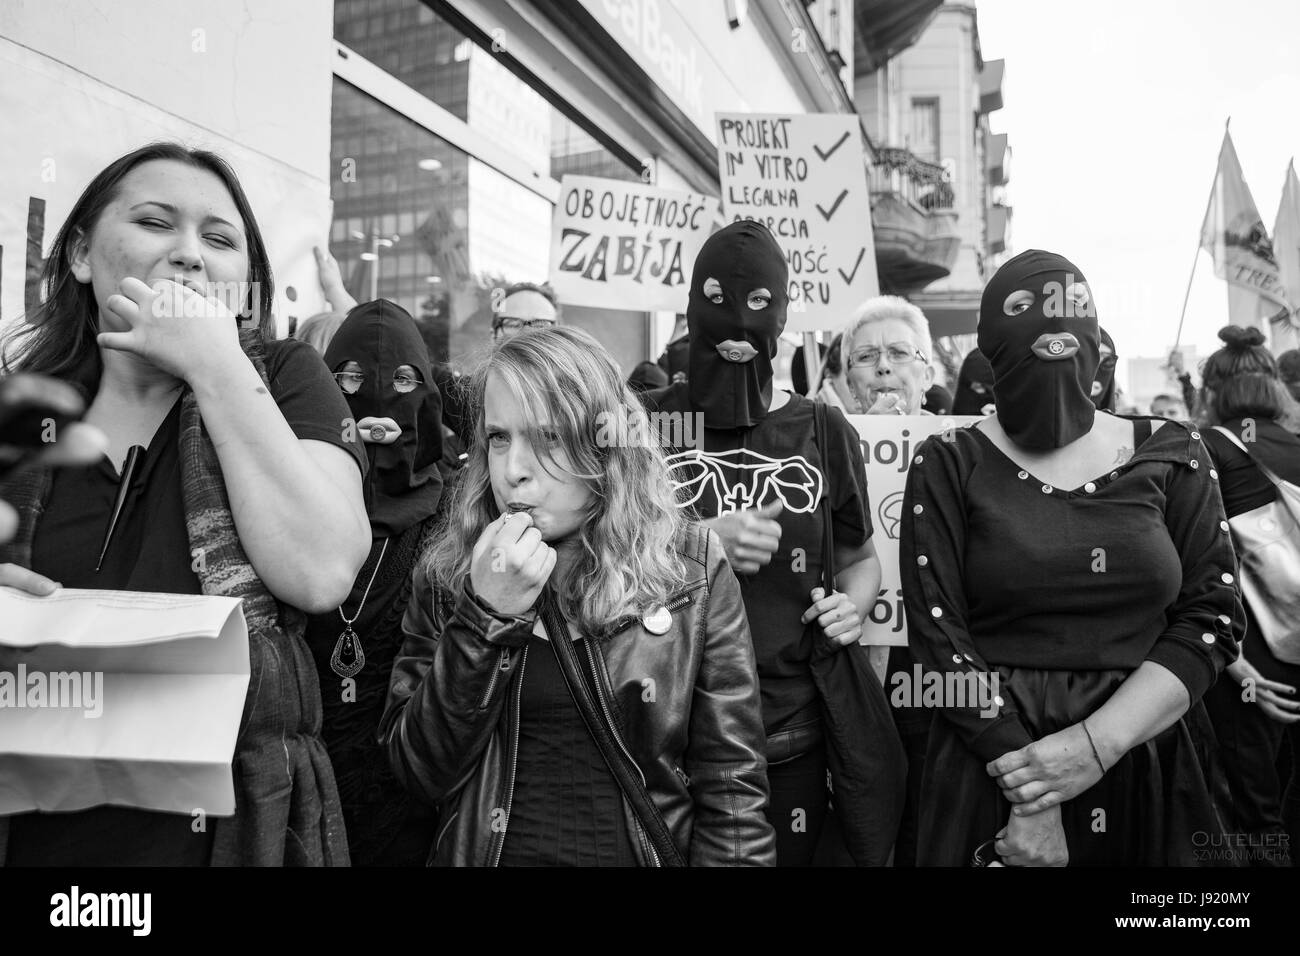 Protests in Poland against the total ban on abortion, black protest, women rights, women protesting. 2016 Poznan. Stock Photo